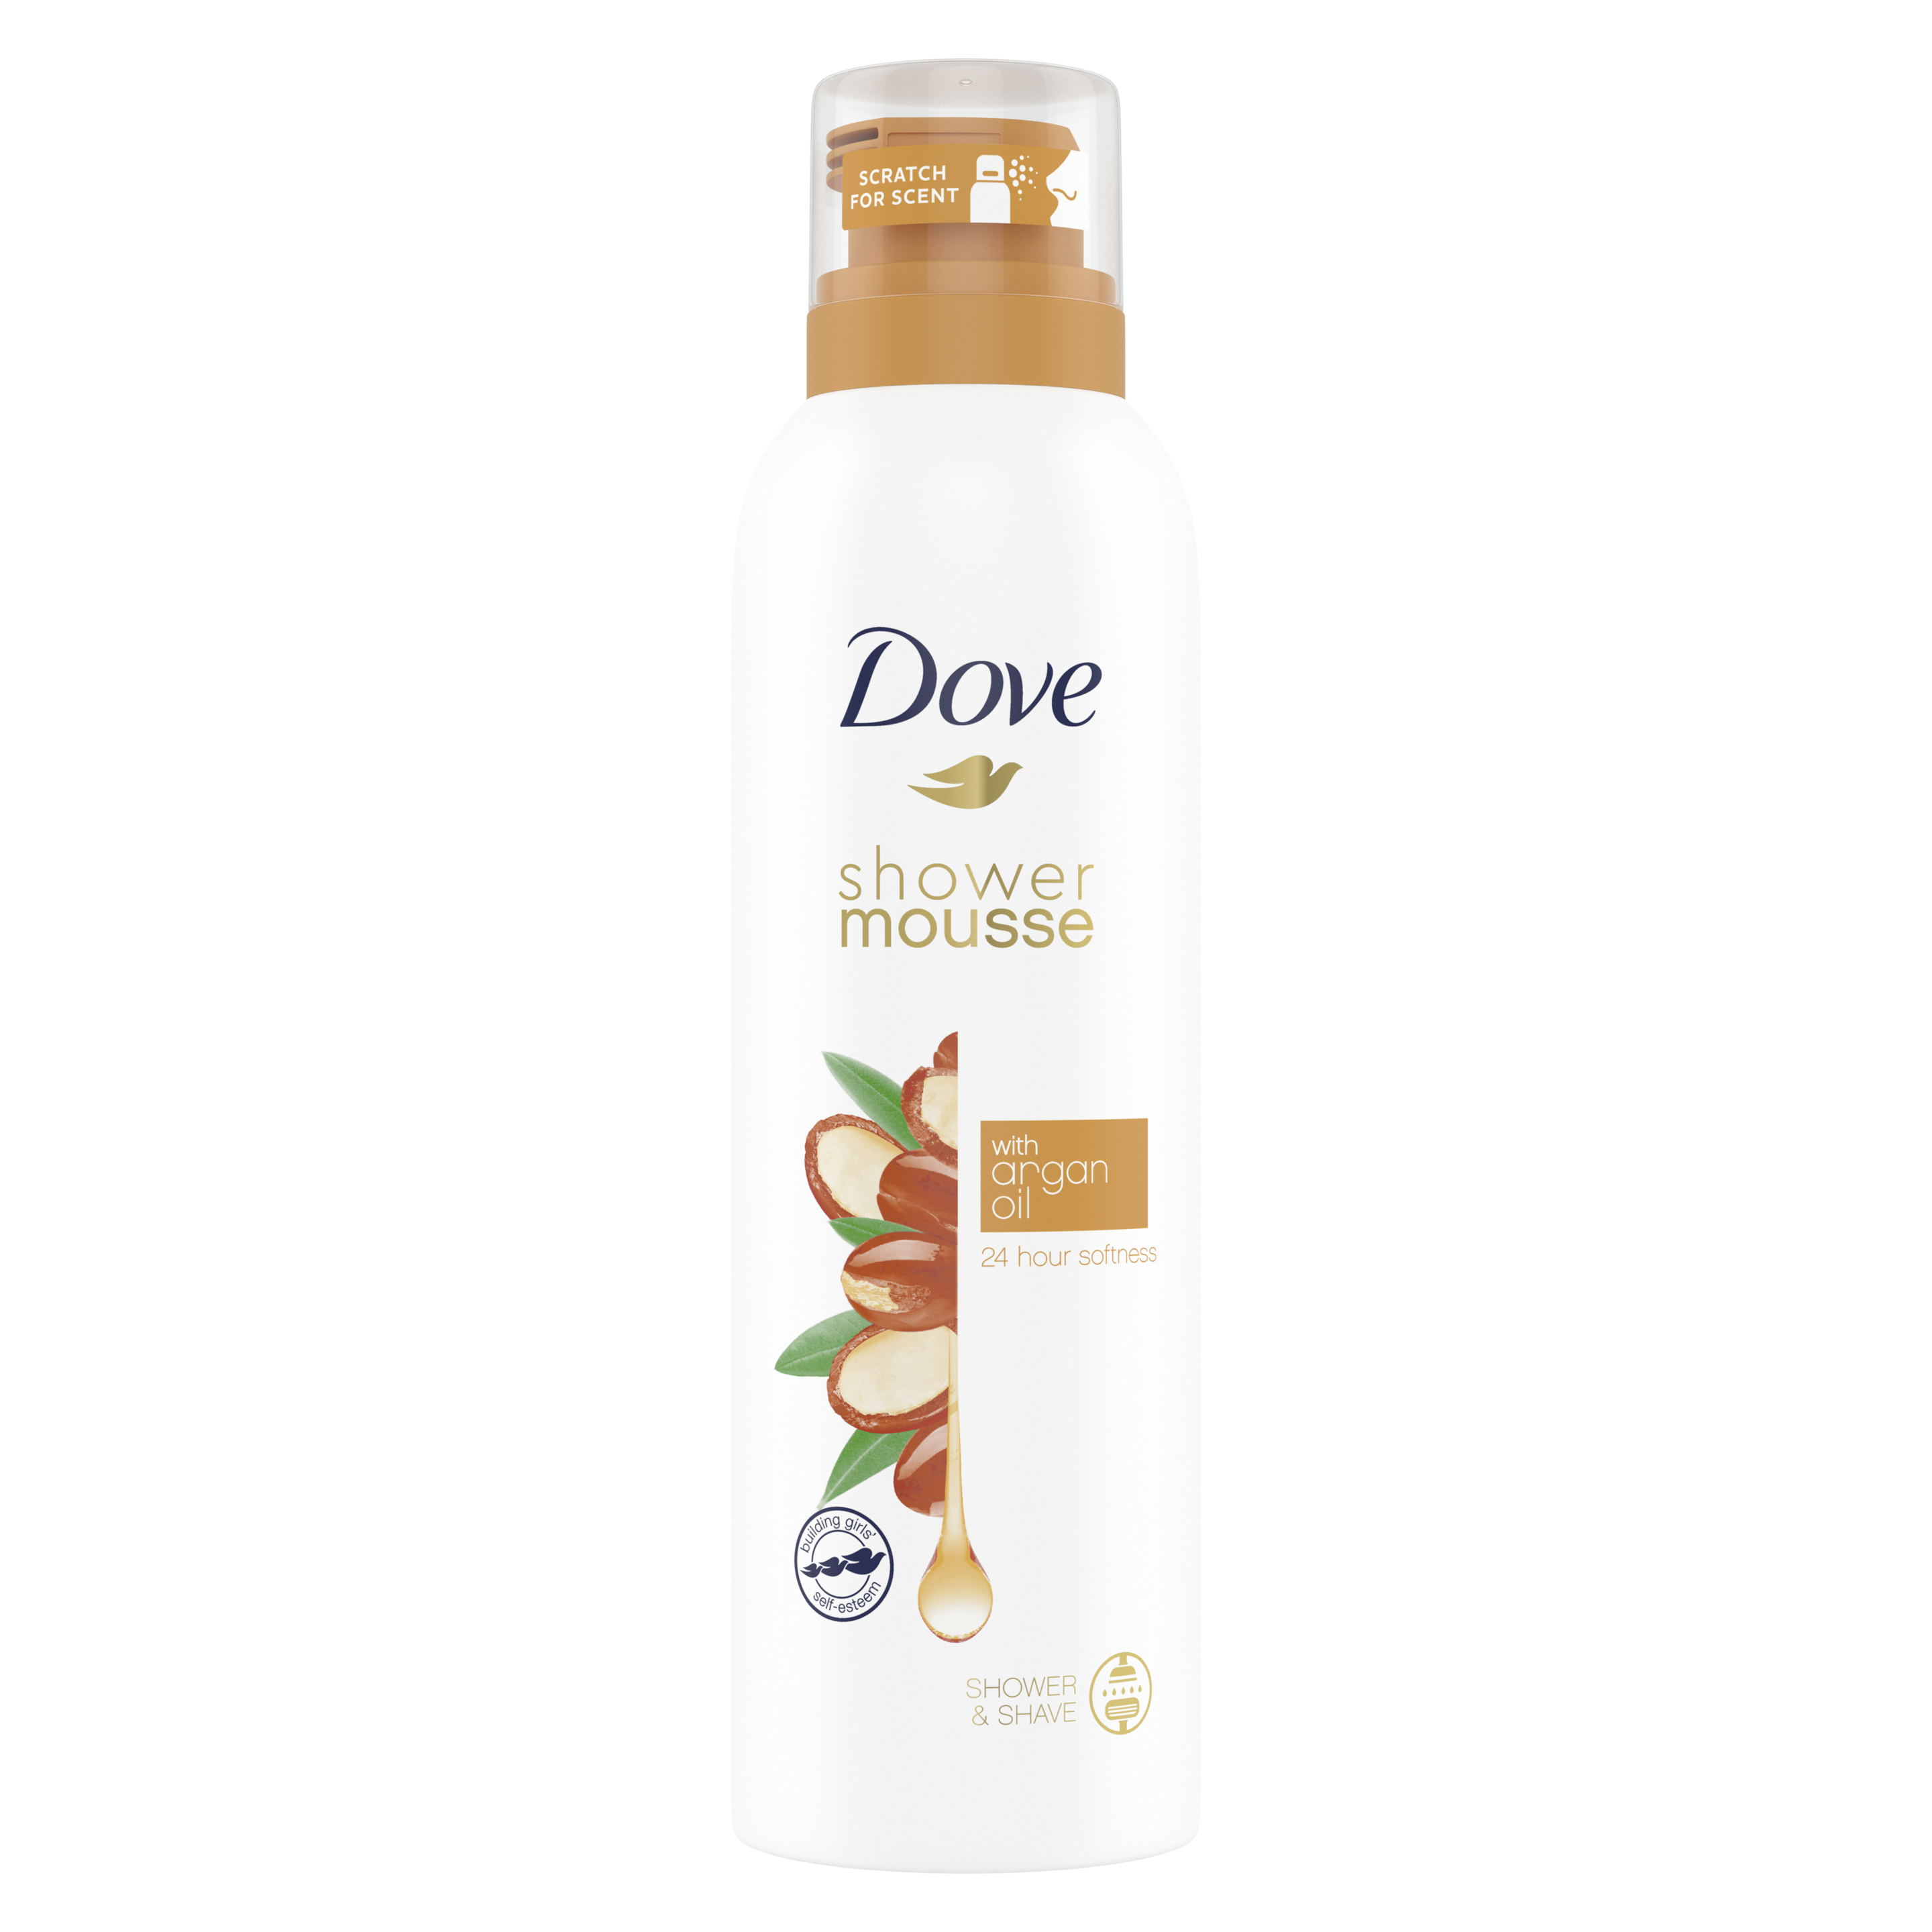 Dove Argan Oil Shower and Shave Mousse 200ml